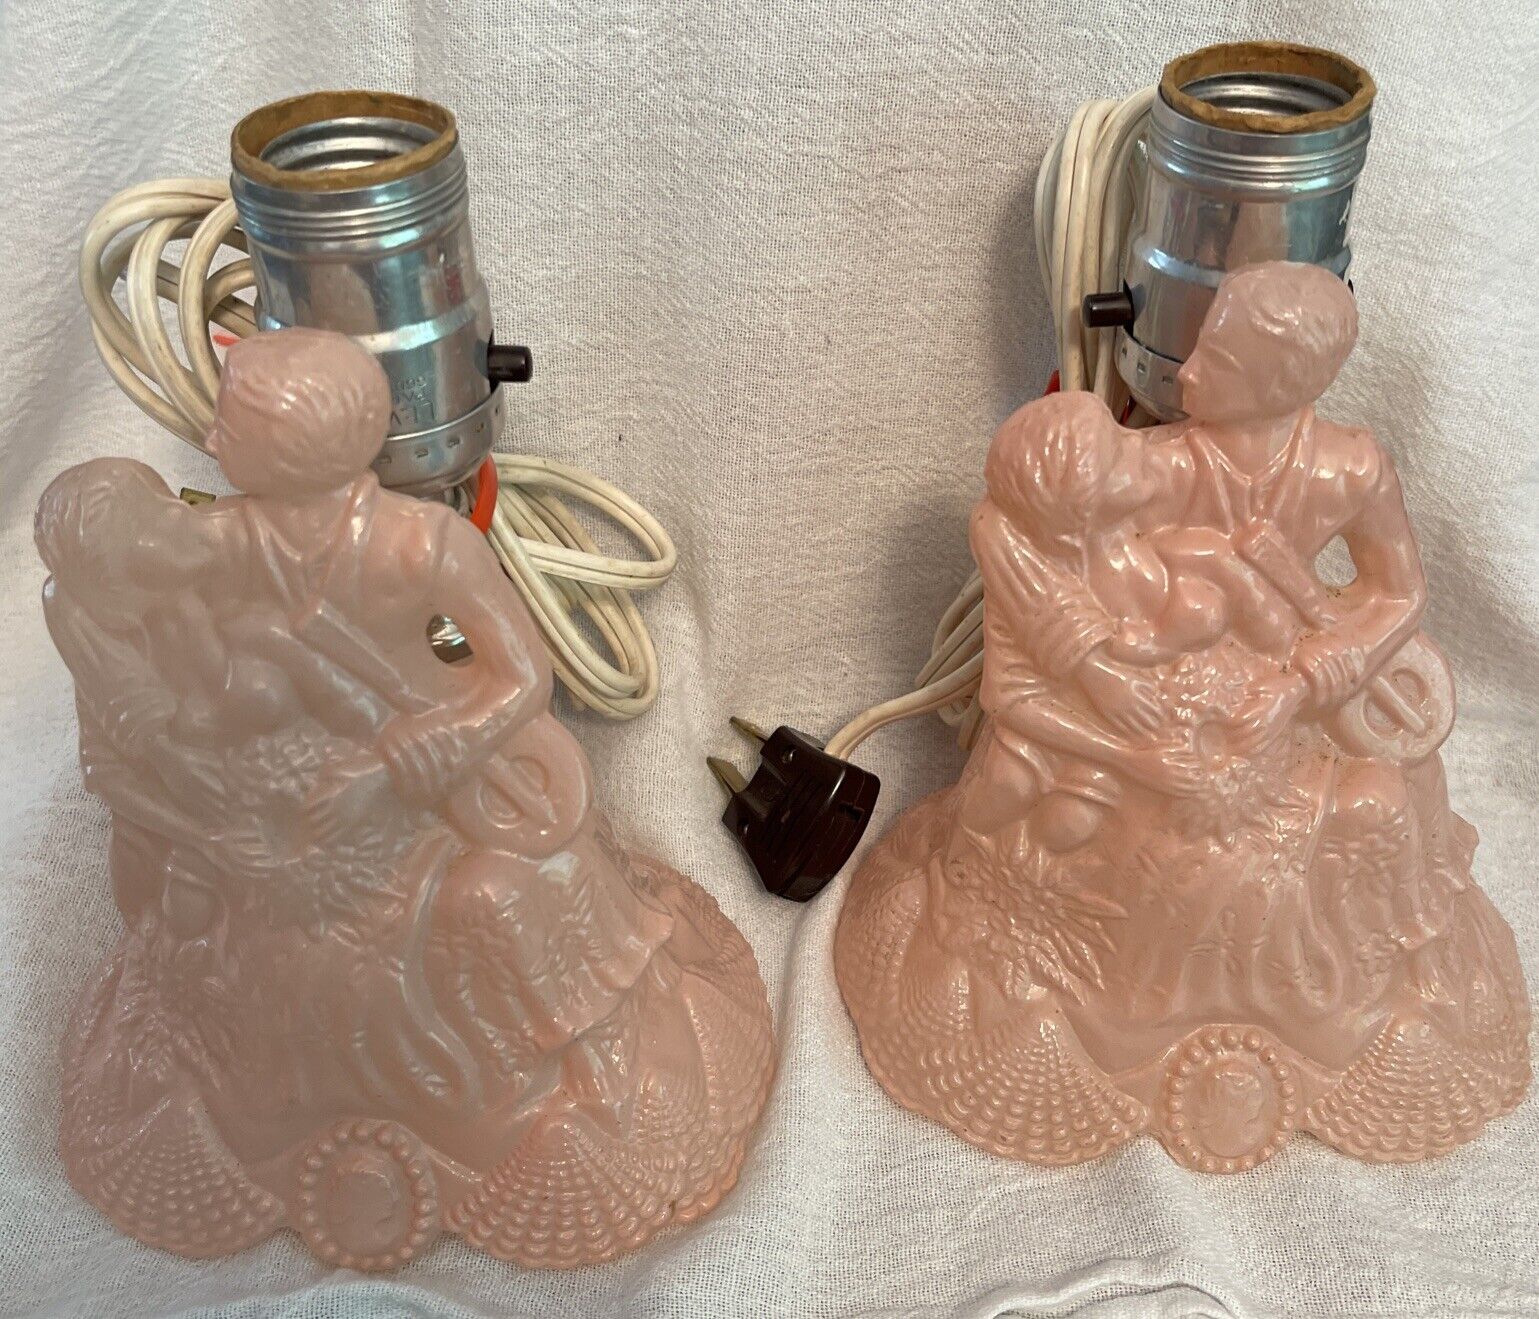 1930s BANJO southern belle gown pink glass boy & girl  Lamps